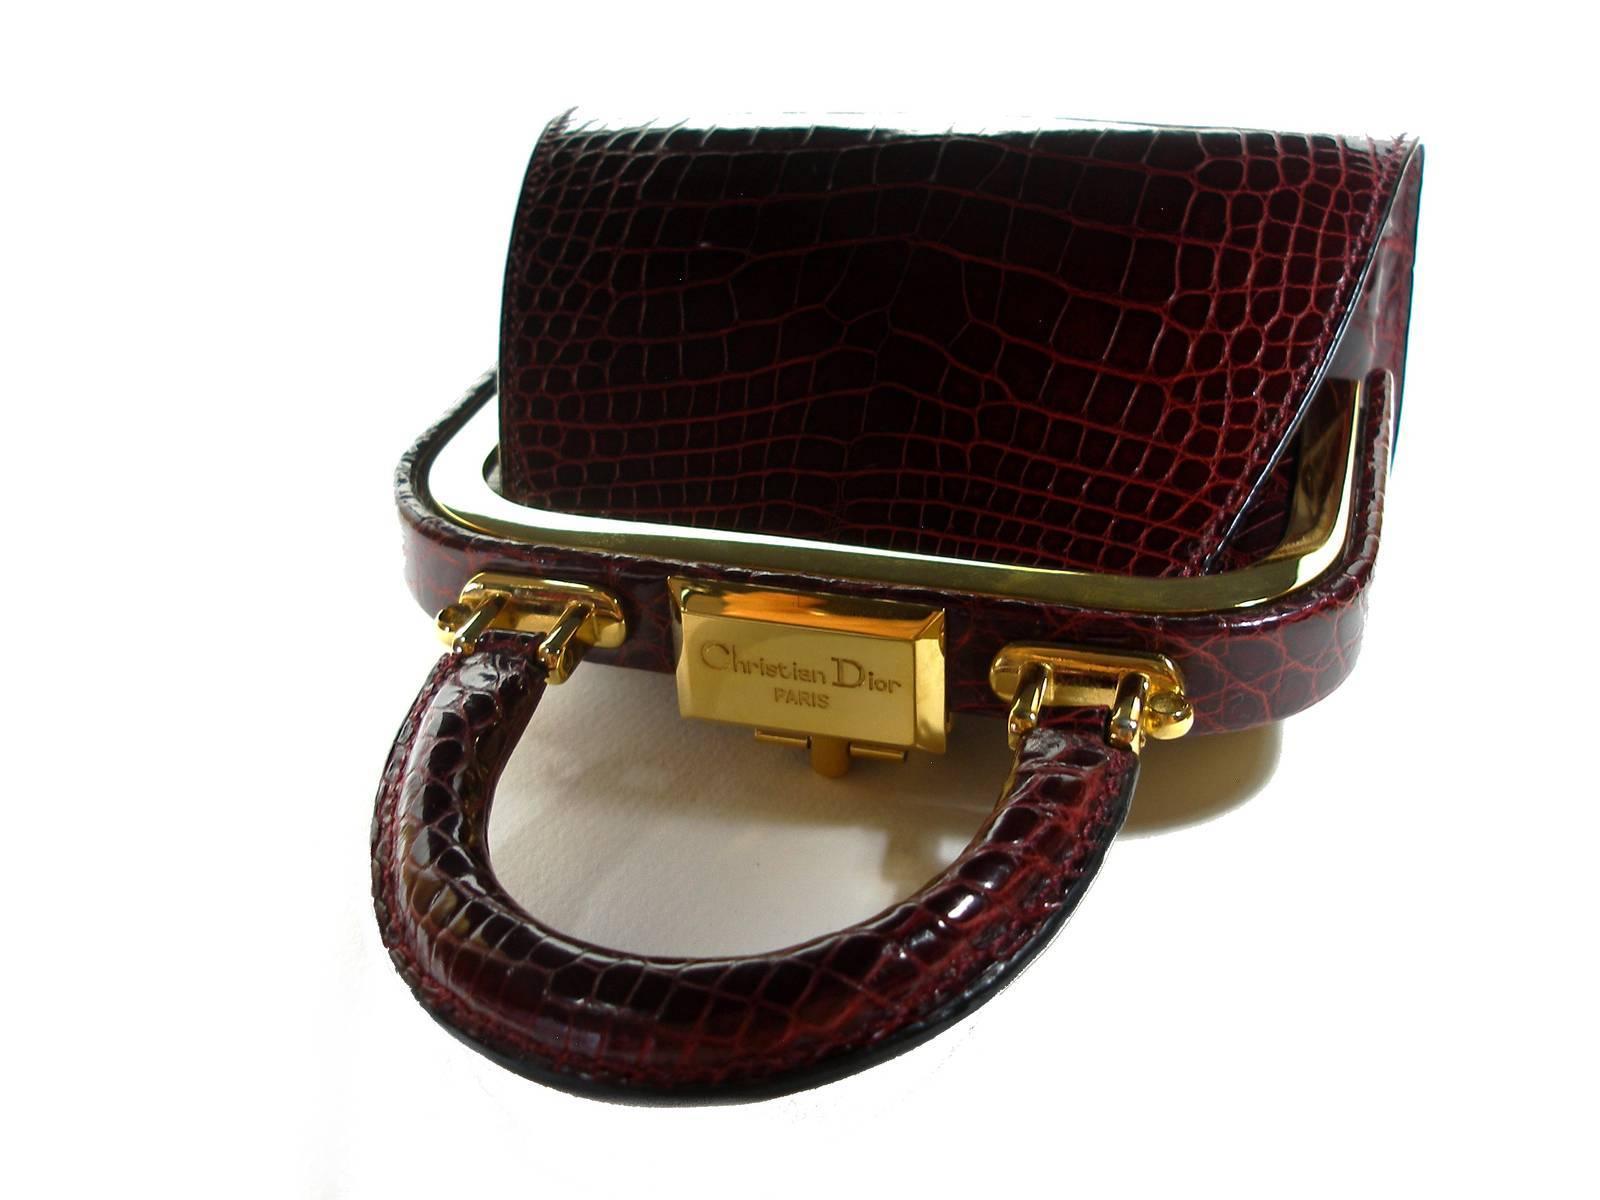 Christian Dior Vintage Rare Doctor Style Micro Handbag in Alligator Leather For Sale 11